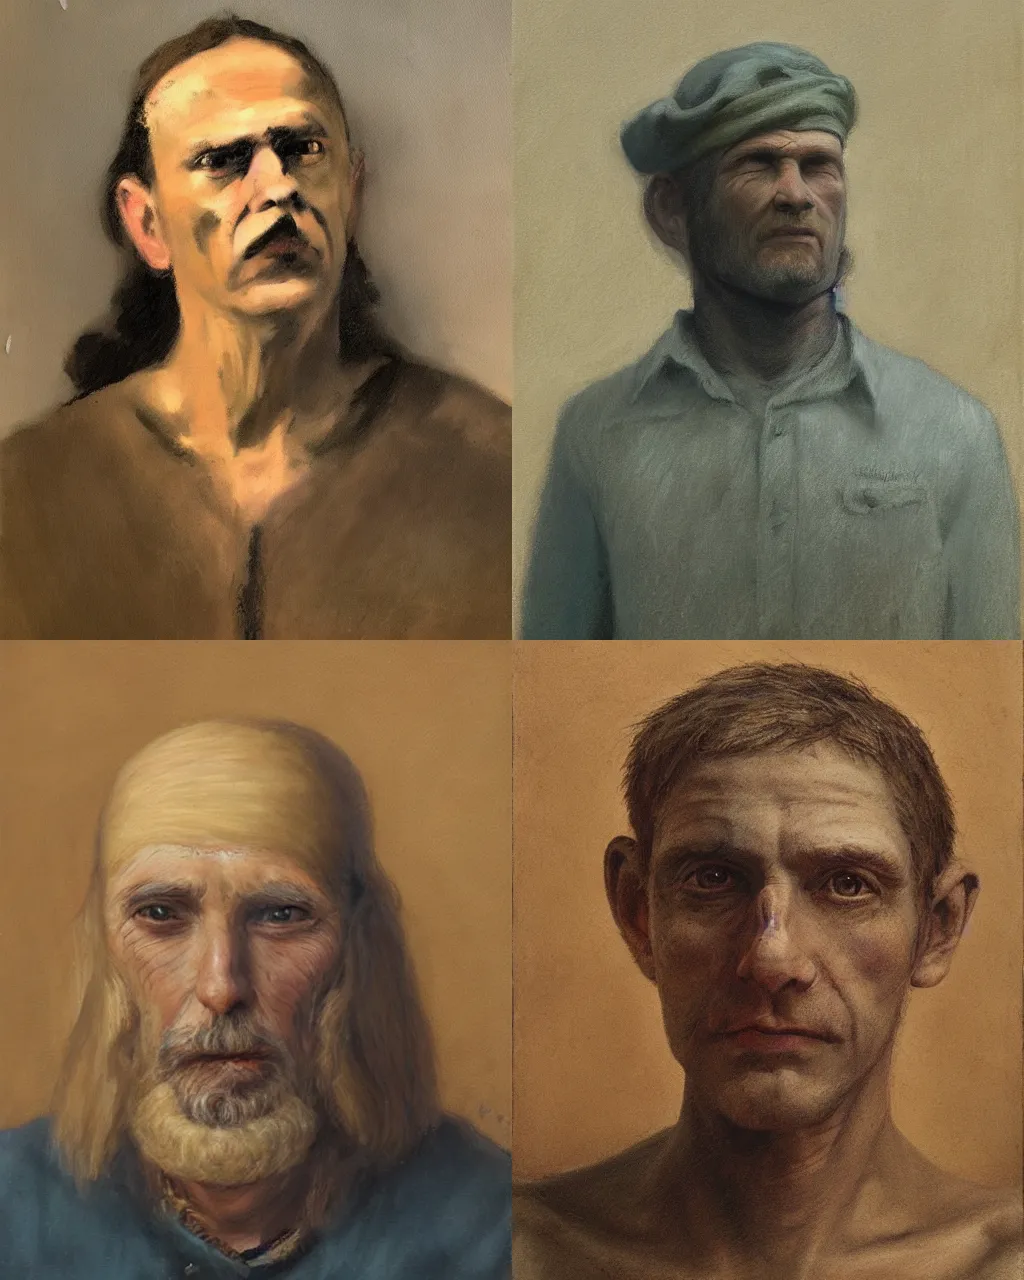 Prompt: Medium shot of a typical character in the style of Odd Nerdrum